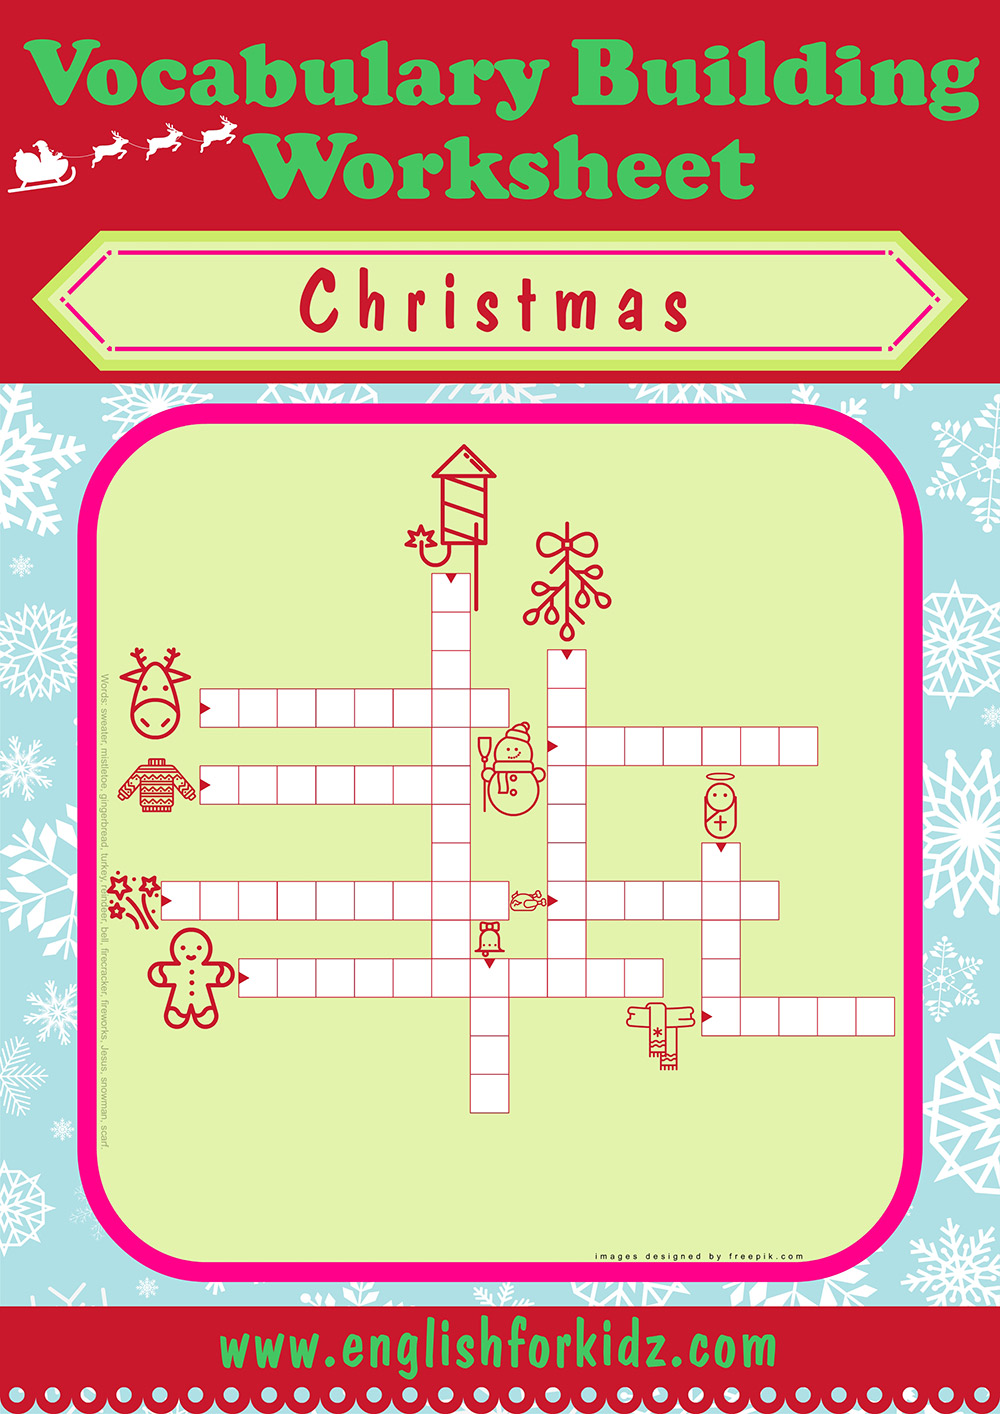 English For Kids Step By Step Christmas Worksheets Crossword Puzzles